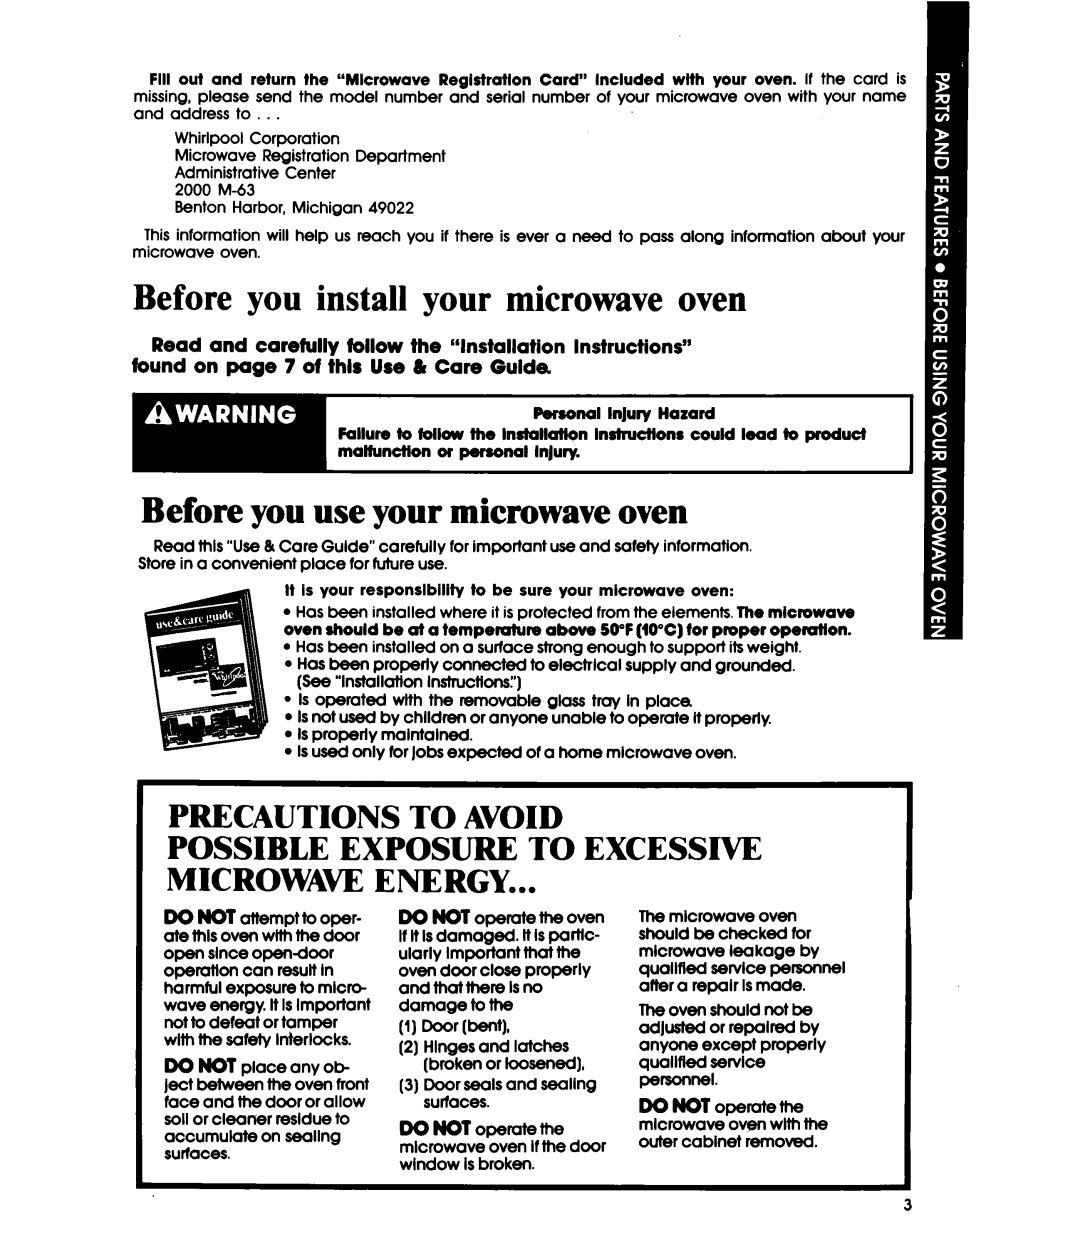 Whirlpool MW1200XW manual Before you install your microwave oven, Before you use your microwave oven, Precautions To Avoid 